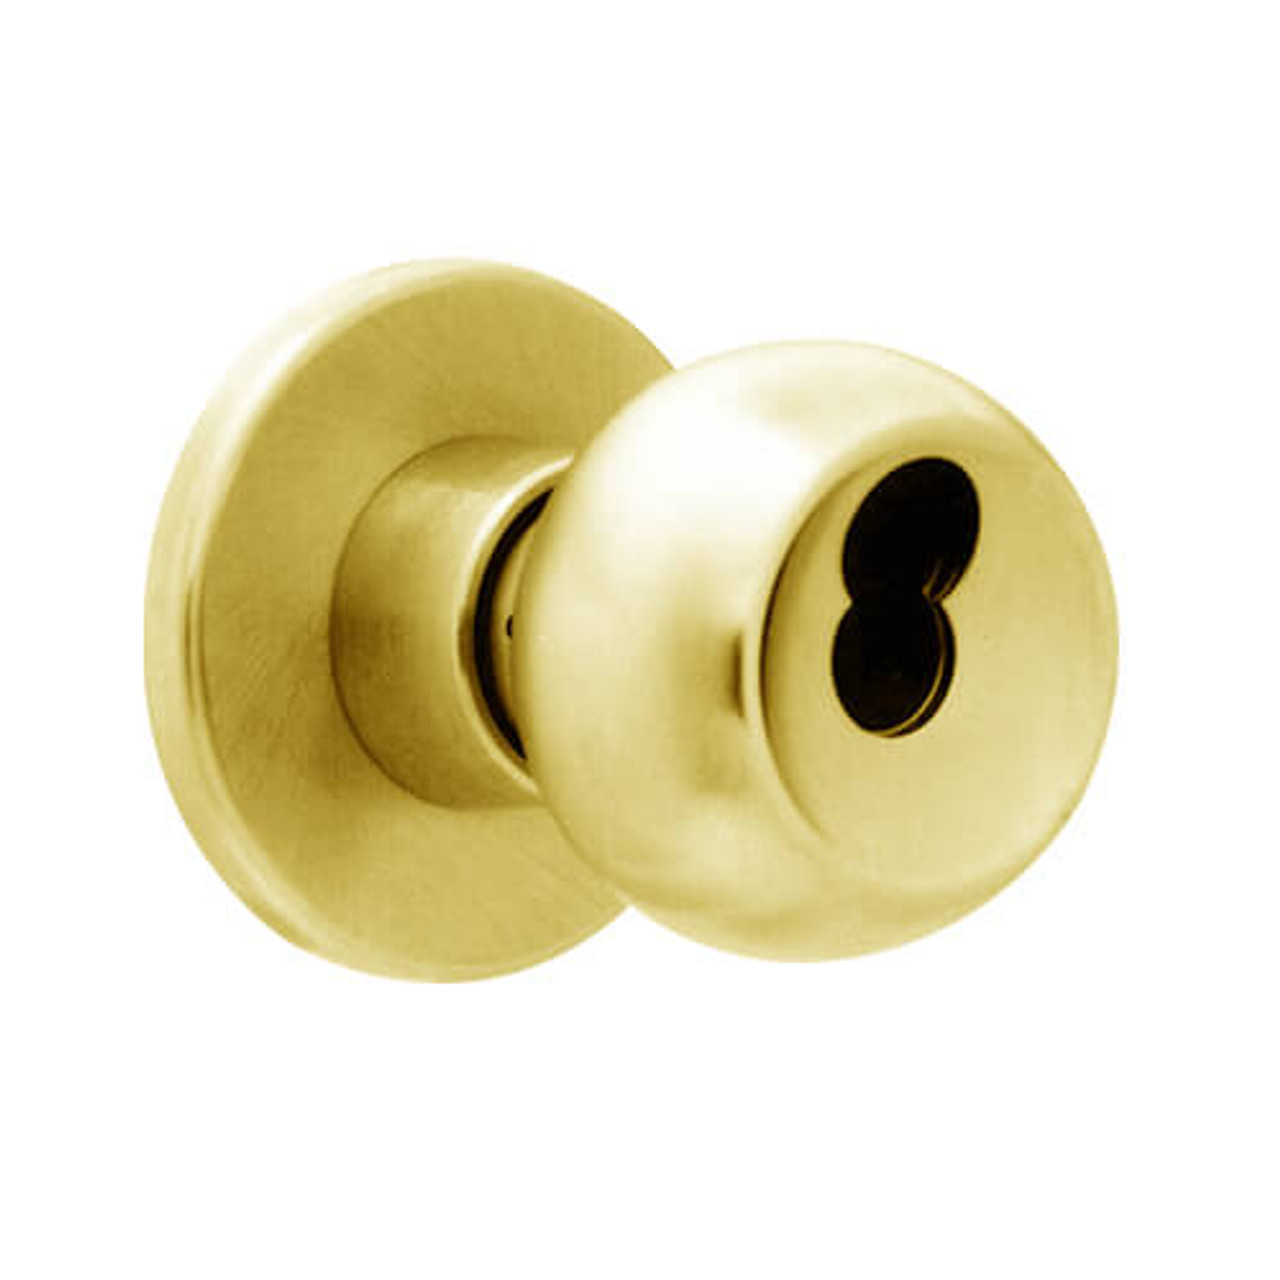 X501BD-TG-605 Falcon X Series Cylindrical Entry Lock with Troy-Gala Knob Style in Bright Brass Finish